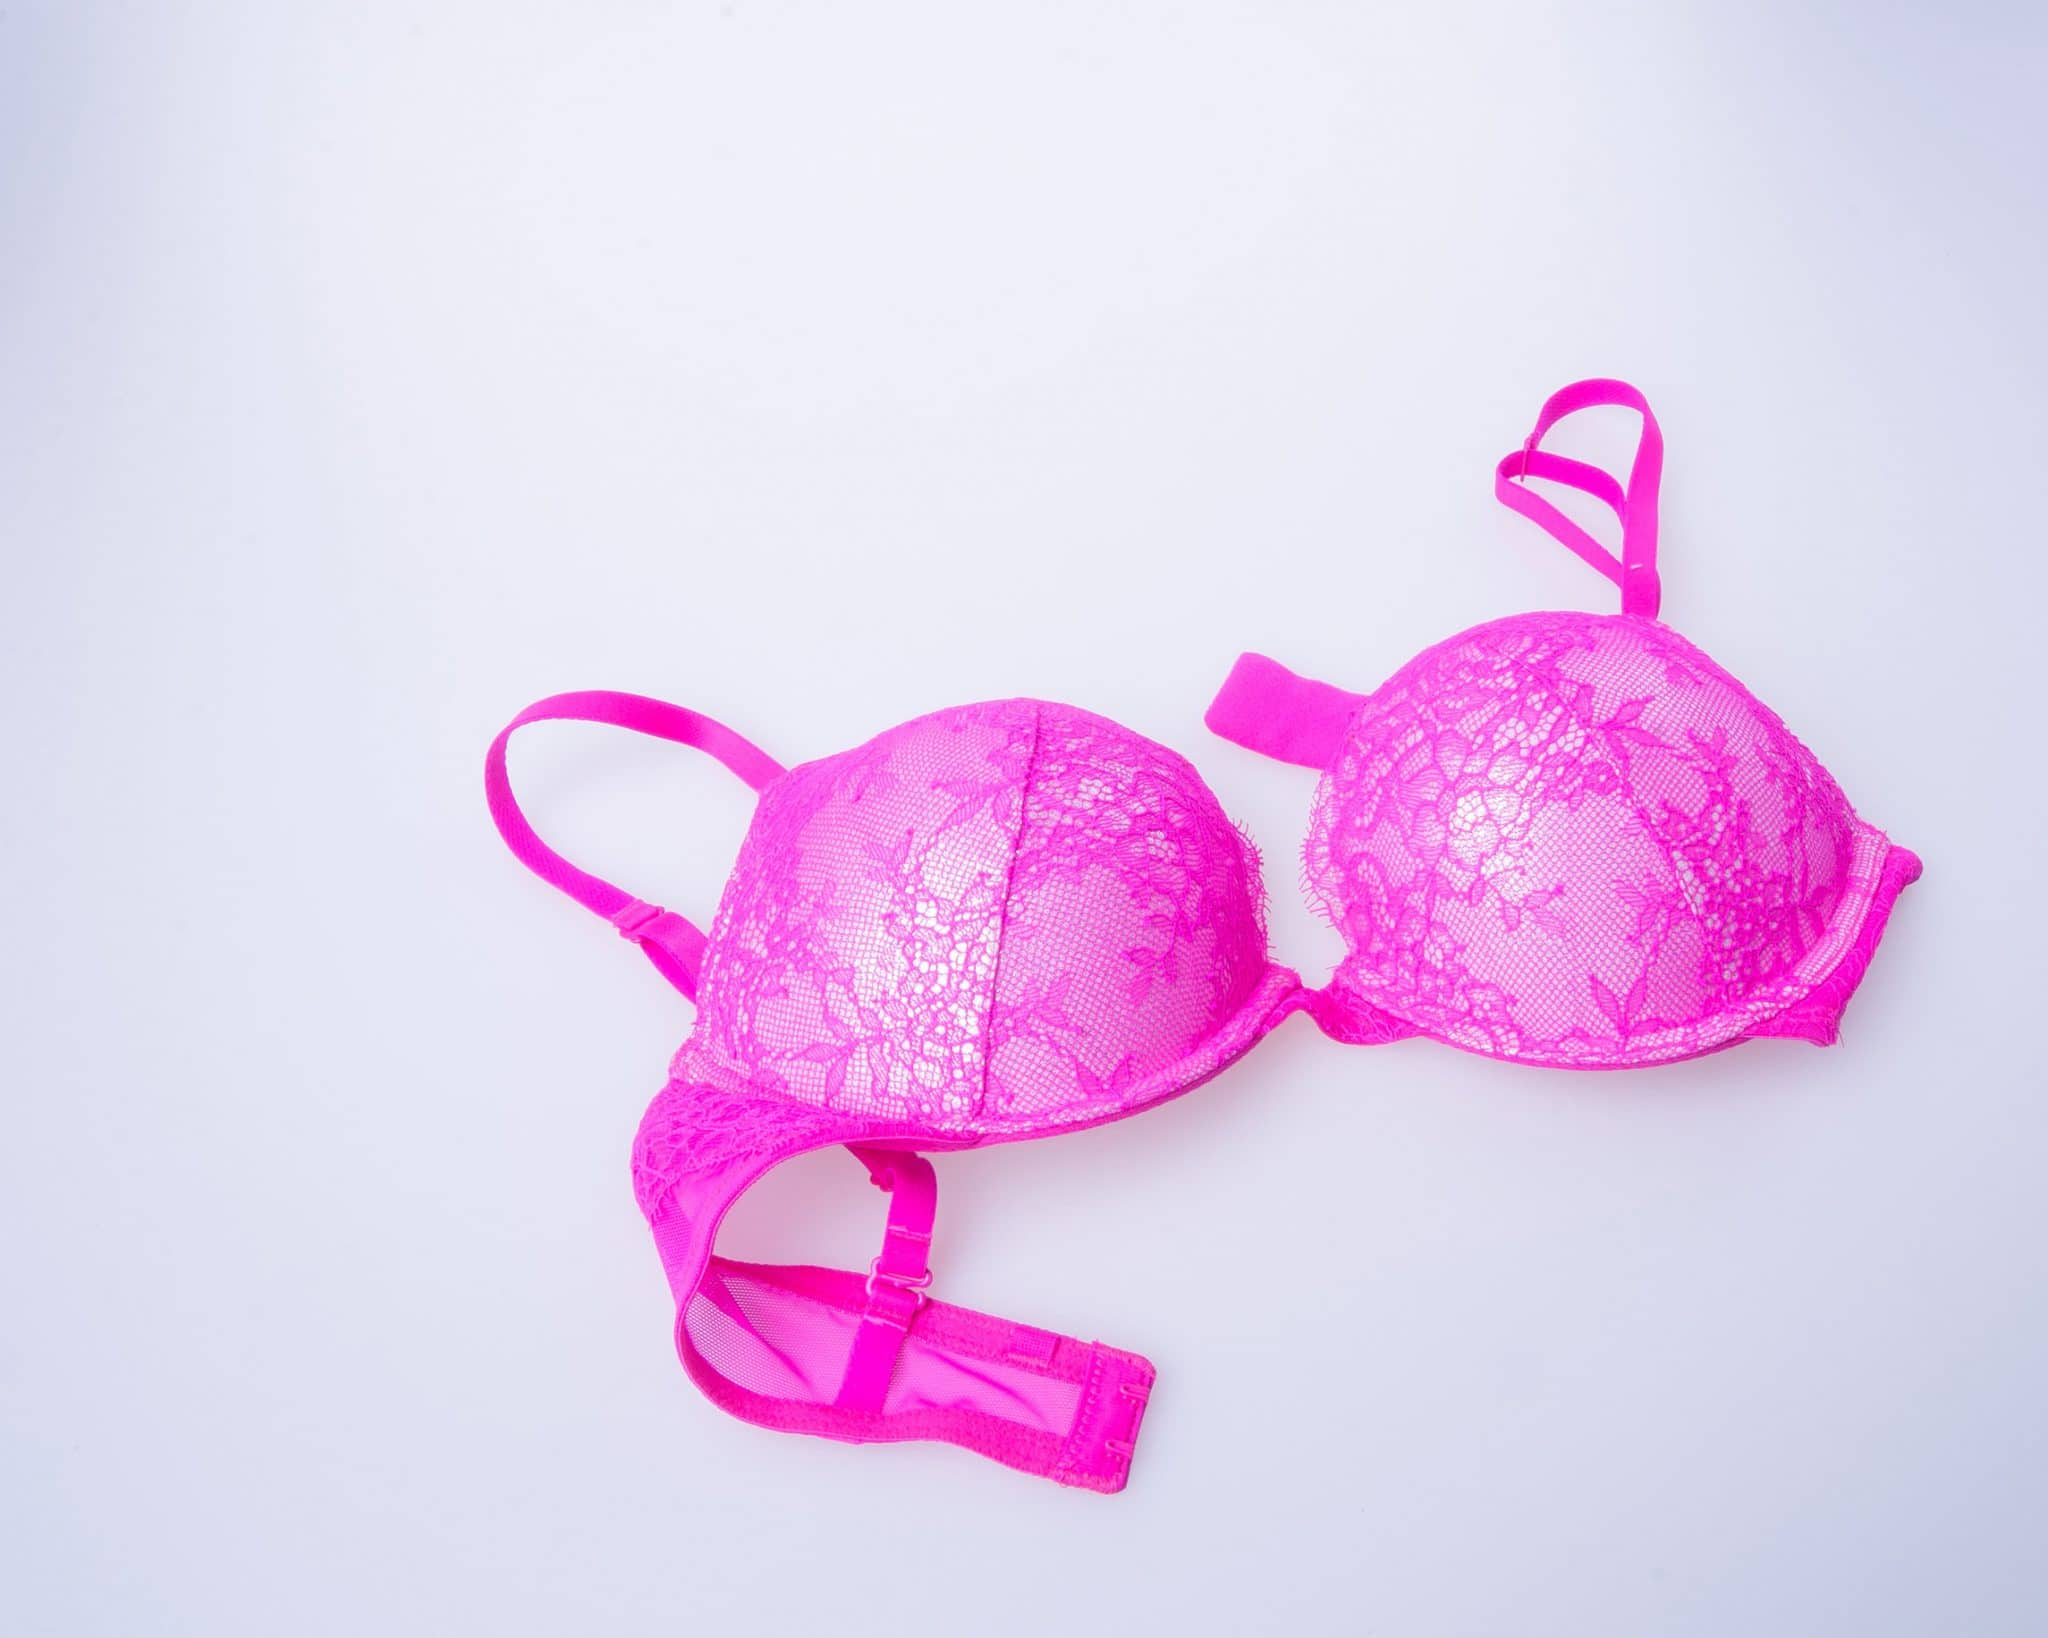 What is the use of a bra?